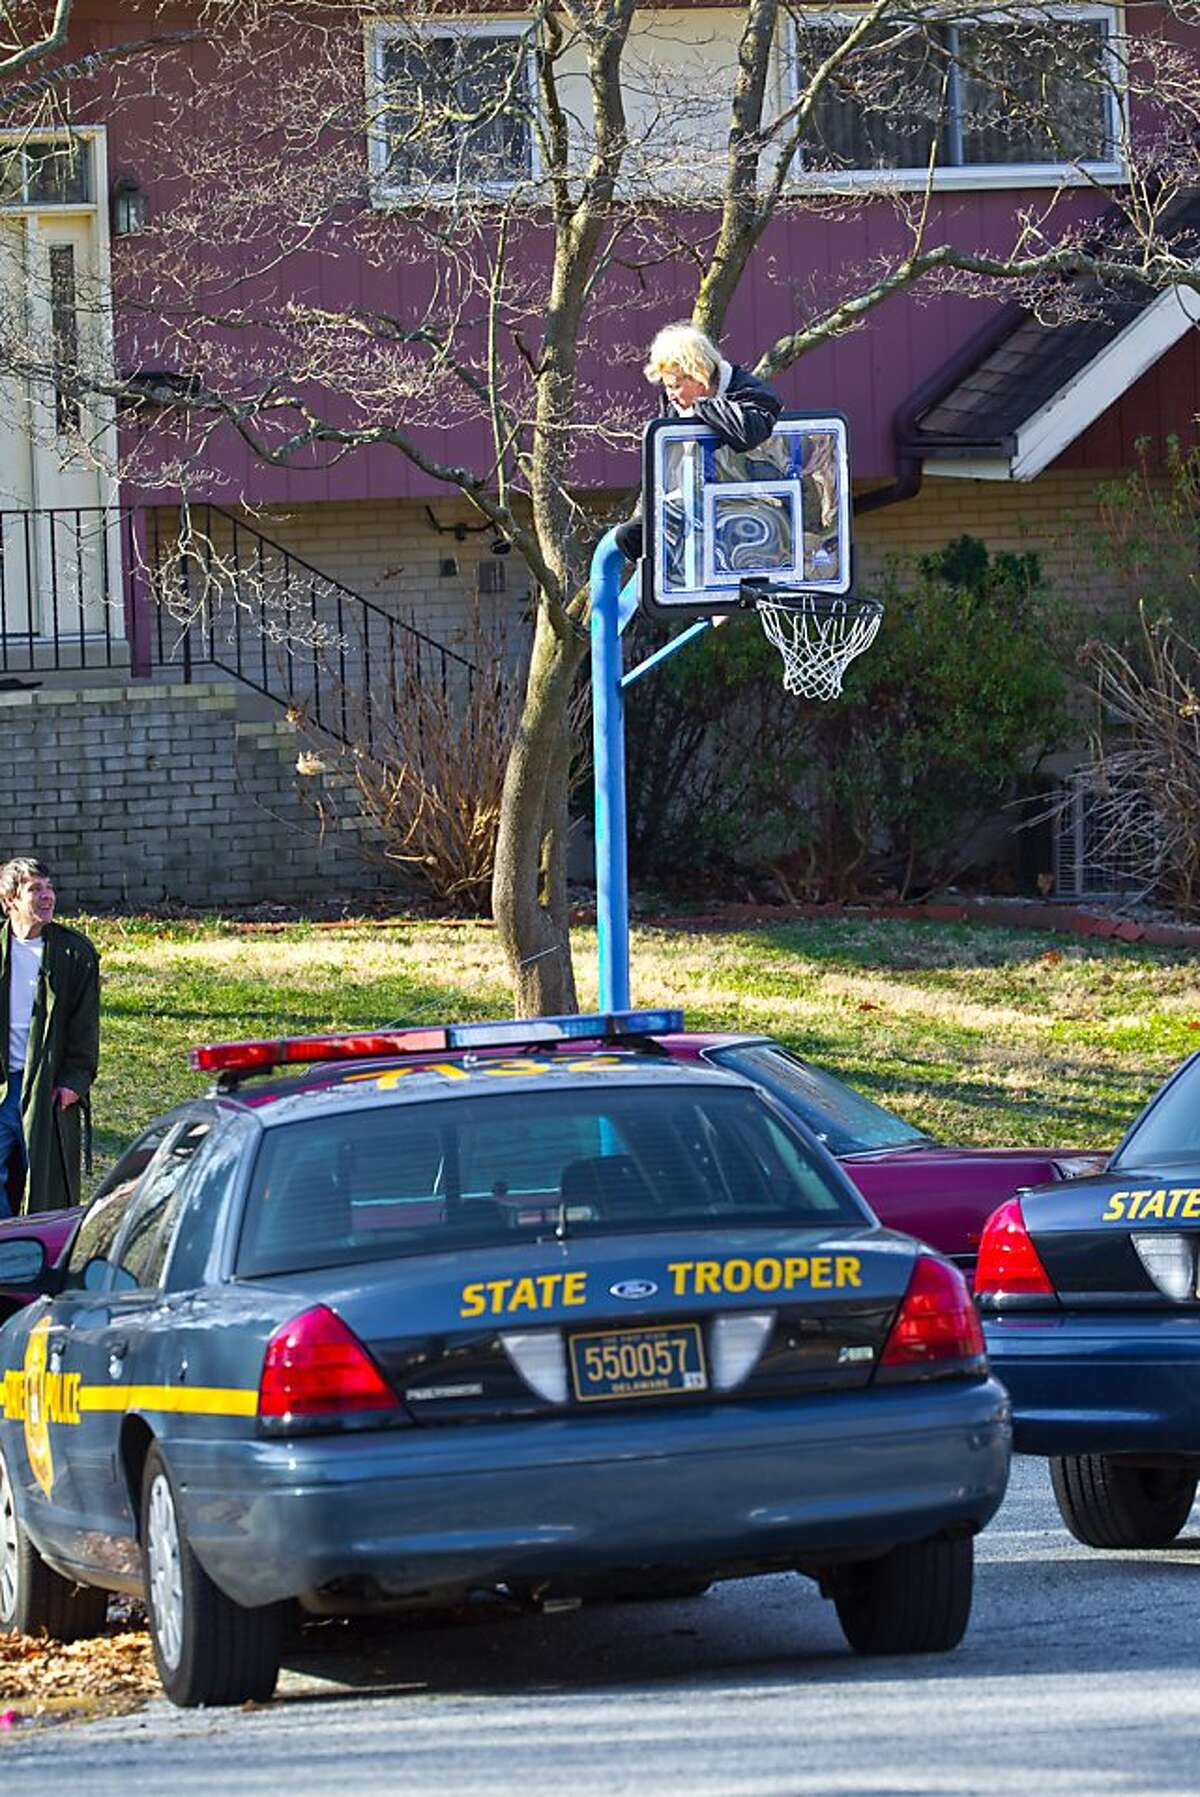 Melissa McCafferty sits on a basketball hoop in protest on after Delaware Department of Transportation crews escorted by state police cruisers tore down basketball hoops, Friday, March 25, 2011, in Claymont, Del. Last fall, DelDOT sent letters to at leasteight residents in the Radnor Green and Ashbourne Hills subdivisions saying their street-side basketball hoops violated the state’s Clear Zone law, which prohibits hoops, trees, shrubs and other objects from being within seven feet of the pavement's edge in subdivisions. DelDOT told residents that if they didn’t take down the hoops that the agency would and residents would be charged for the removal and disposal costs, said Radnor Green resident John McCafferty.